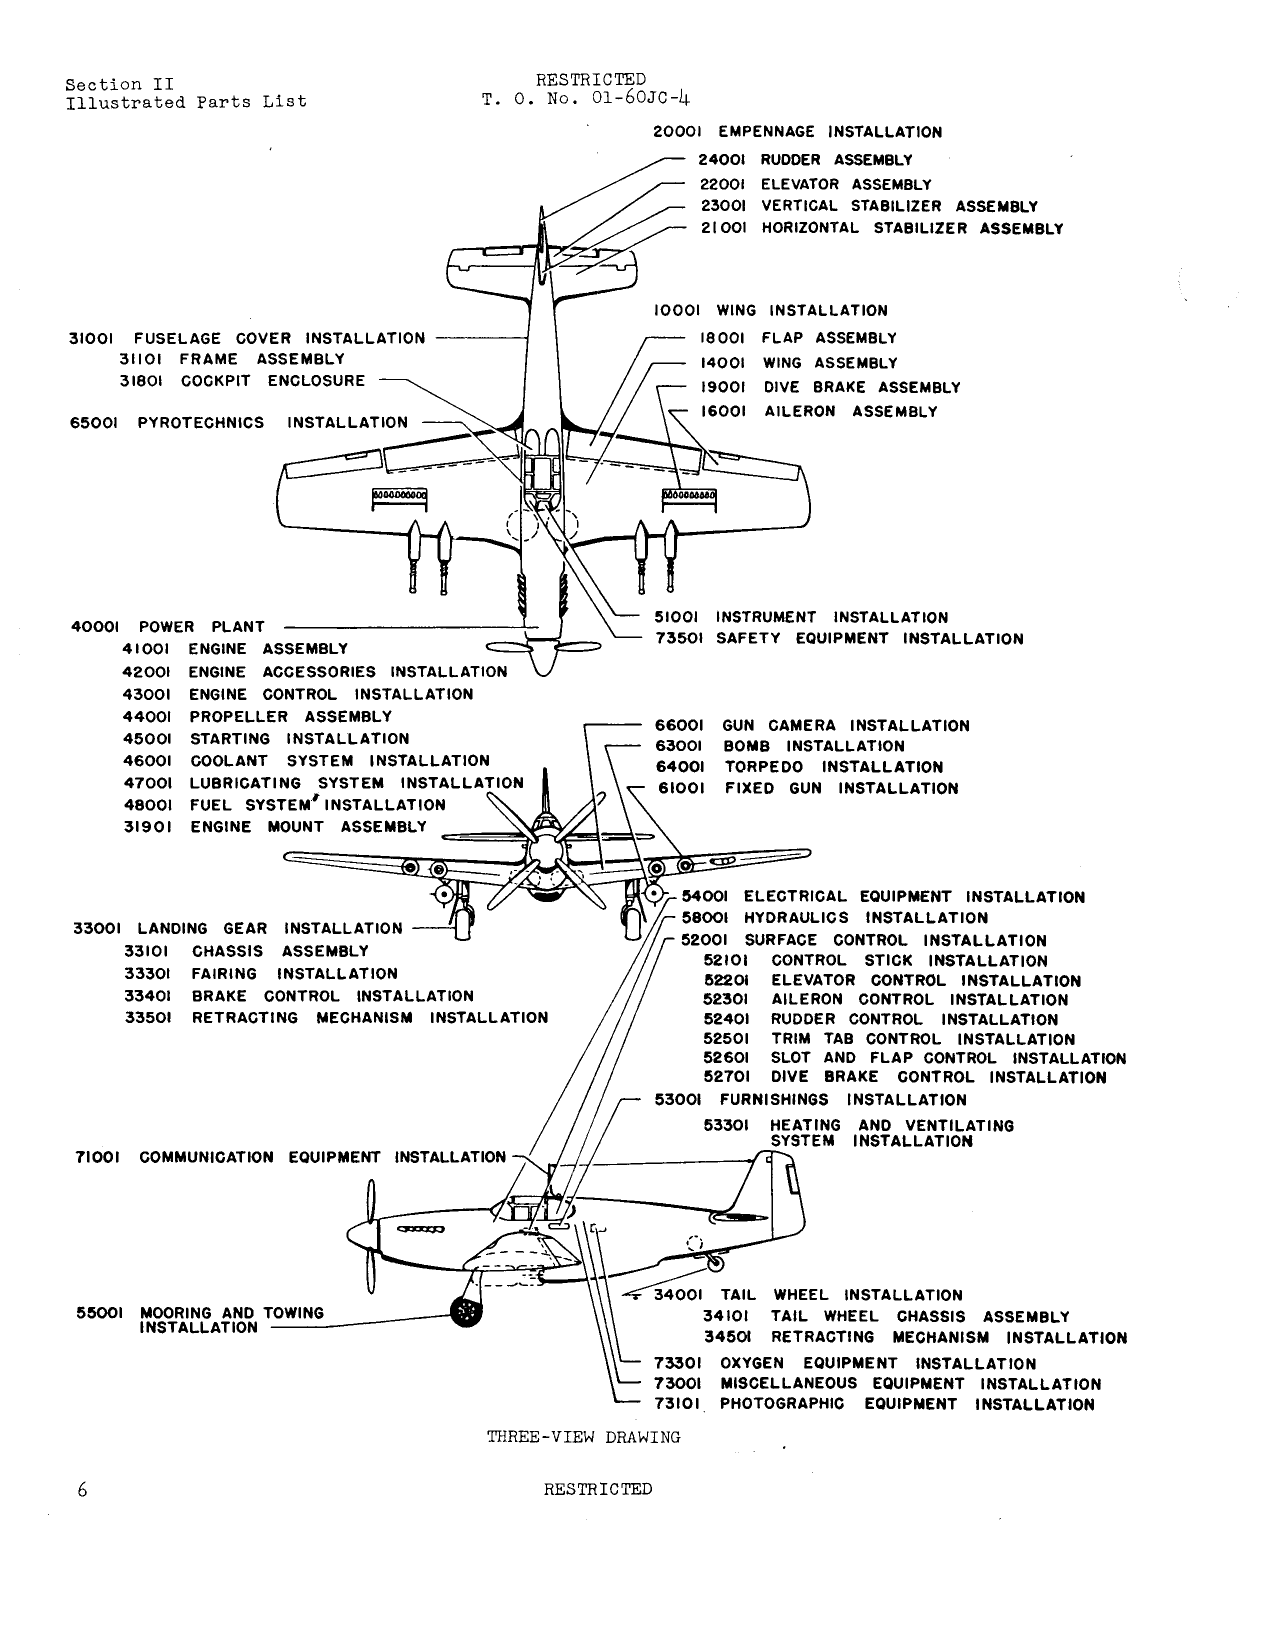 Sample page 8 from AirCorps Library document: Parts Catalog for P-51A Aircraft